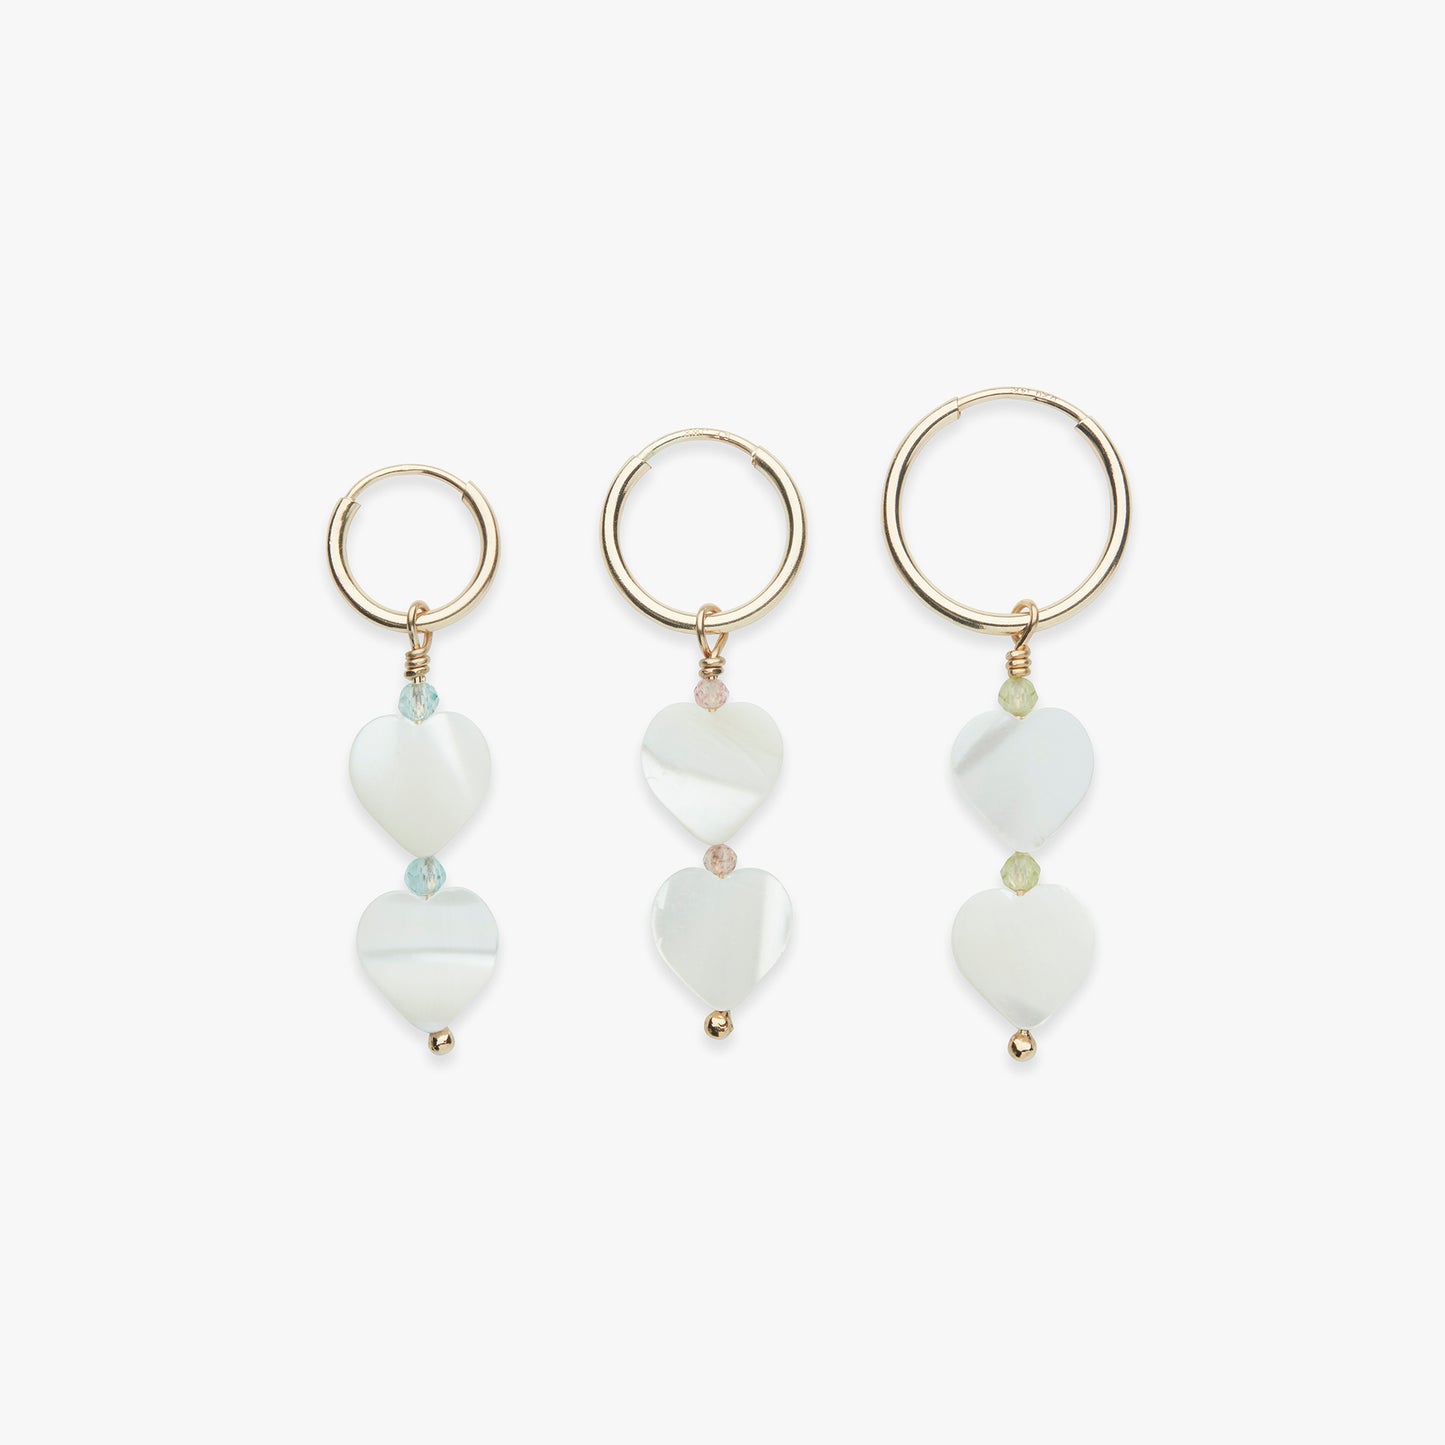 Milky Hearts earring gold filled